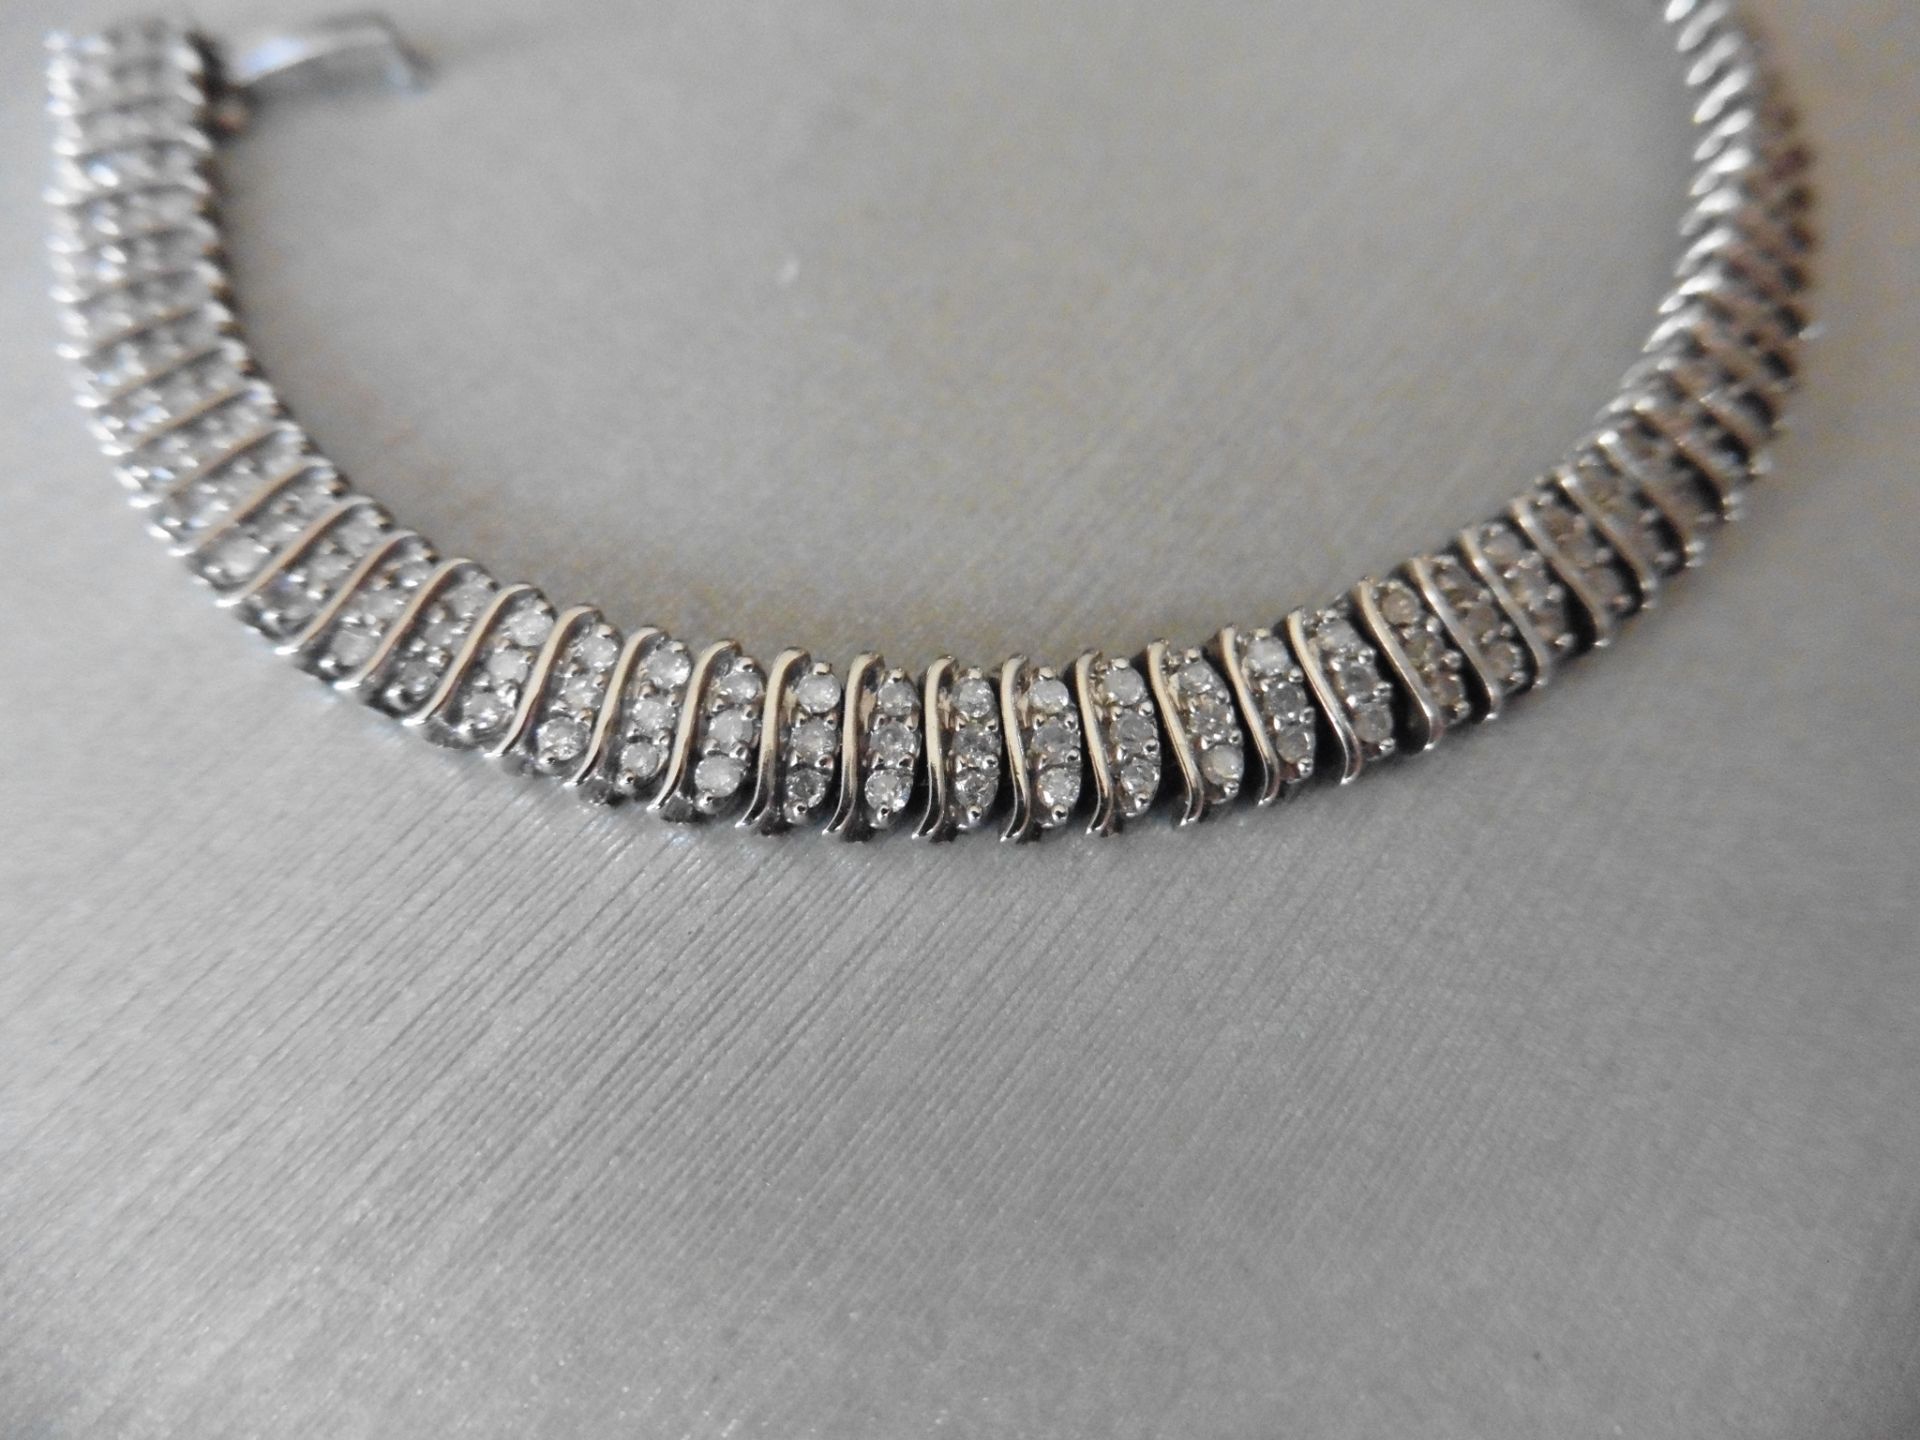 2.02ct 9ct white gold fancy diamond bracelet. Set with 3 rows of small brilliant cut diamonds, I - Image 2 of 5